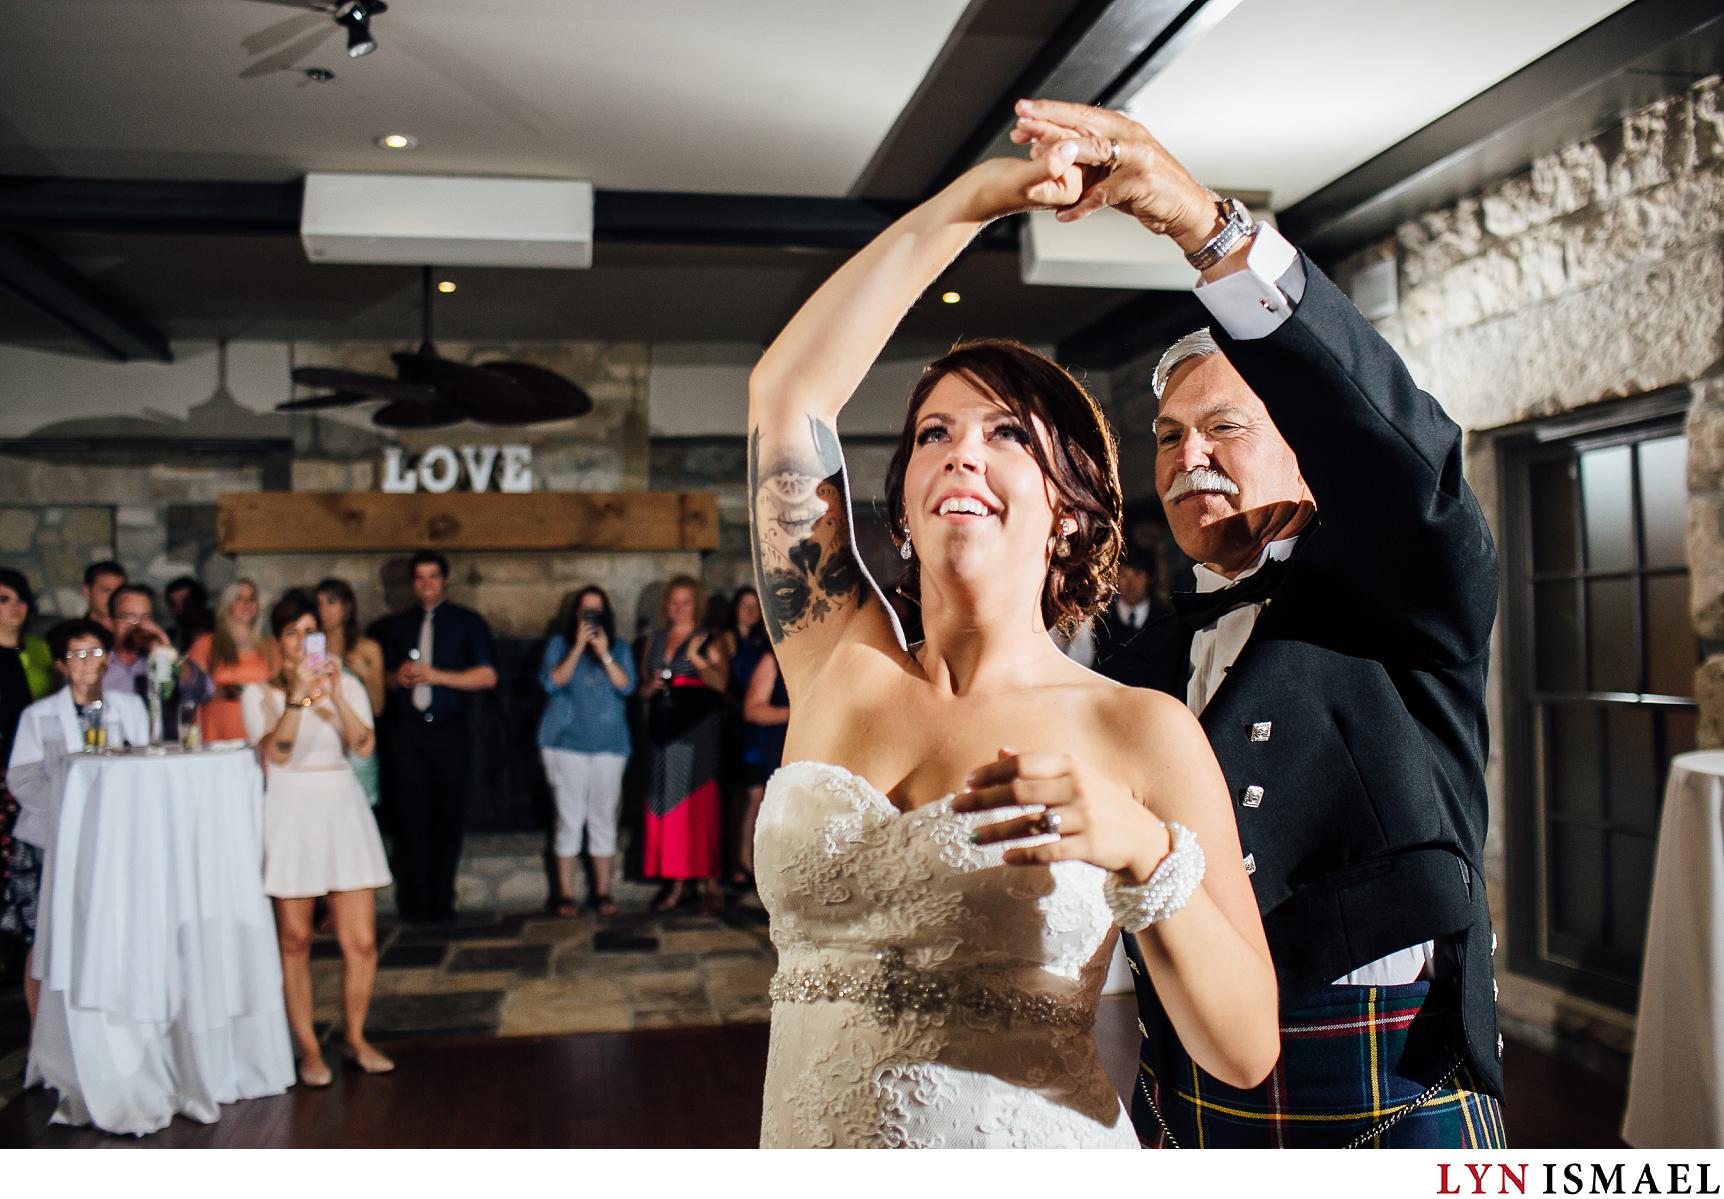 A father-daughter dance at a Waterloo Region wedding.